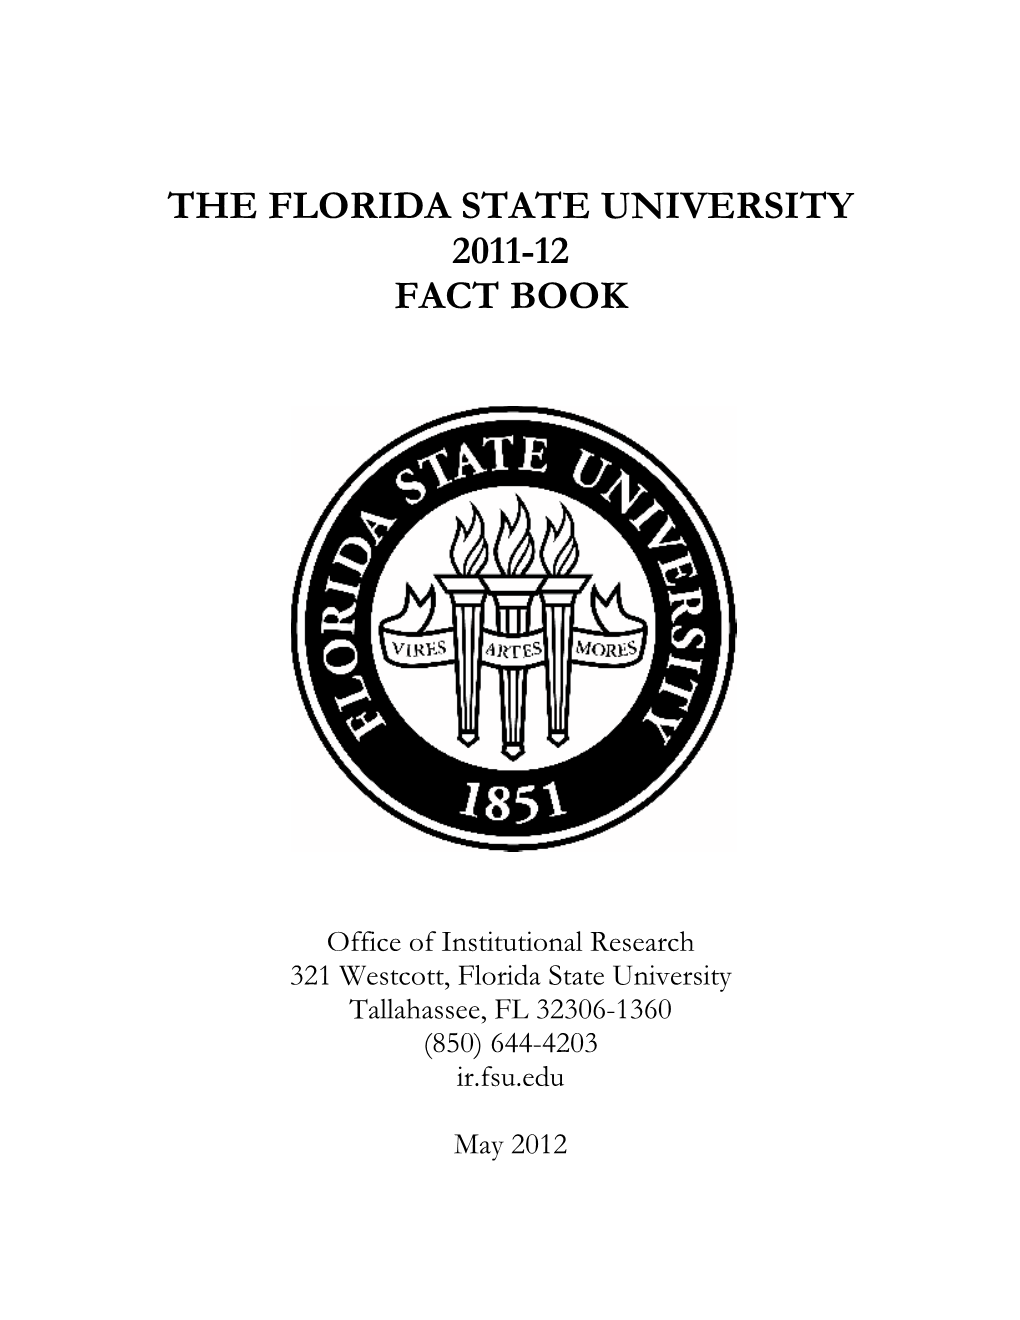 The Florida State University 2011-12 Fact Book